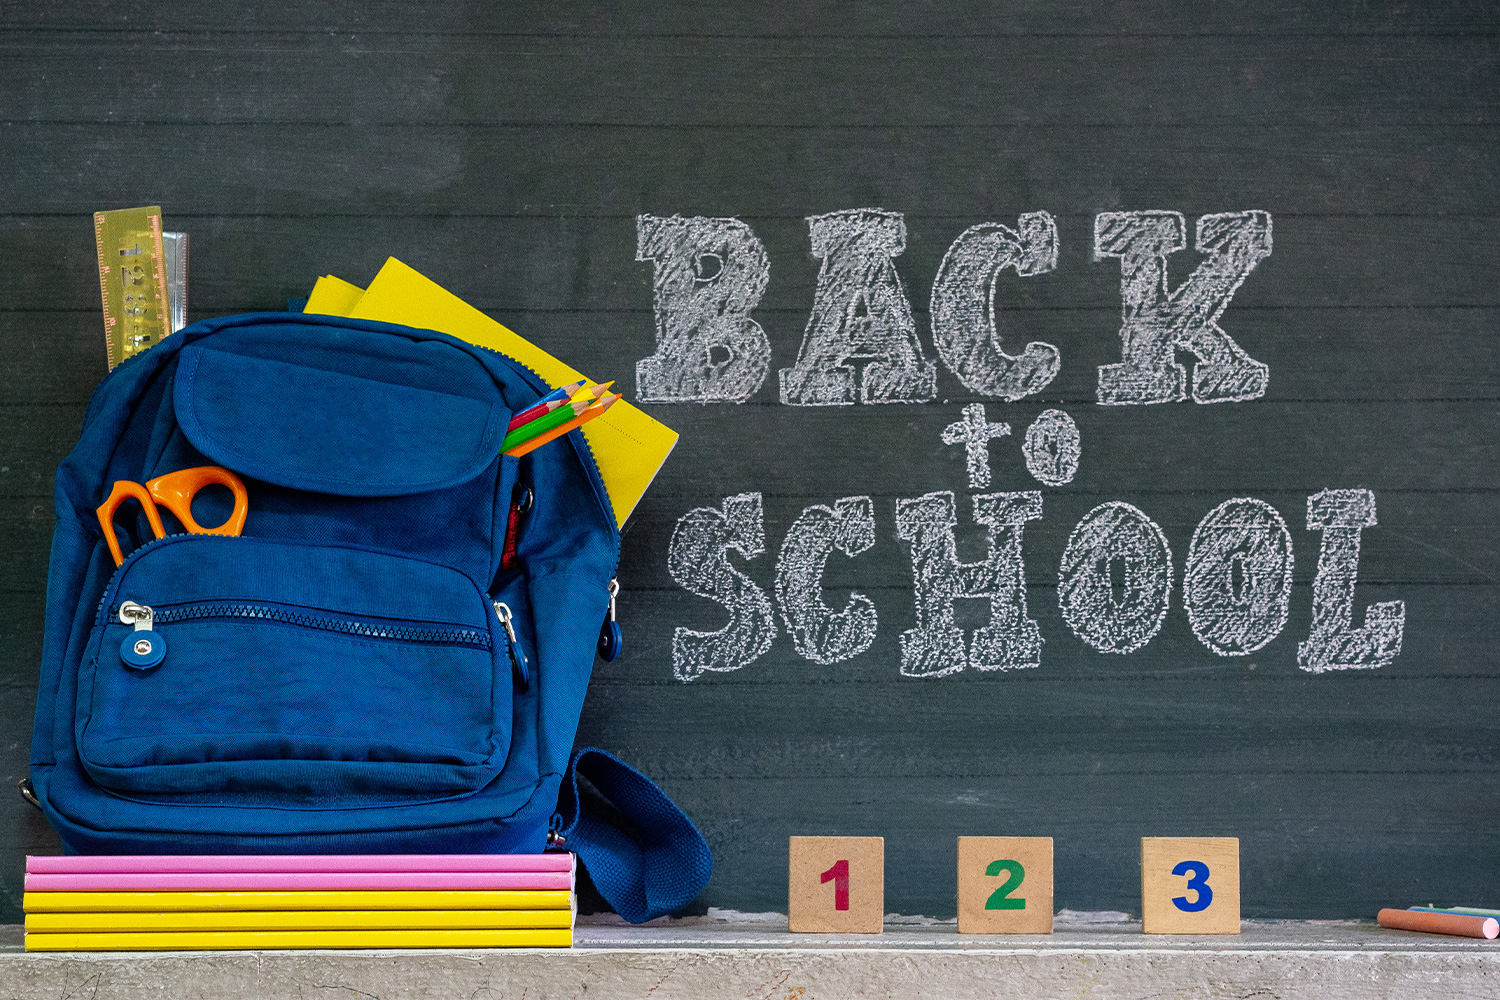 I'm a mom - I cut down on back to school costs by refusing to buy a common item